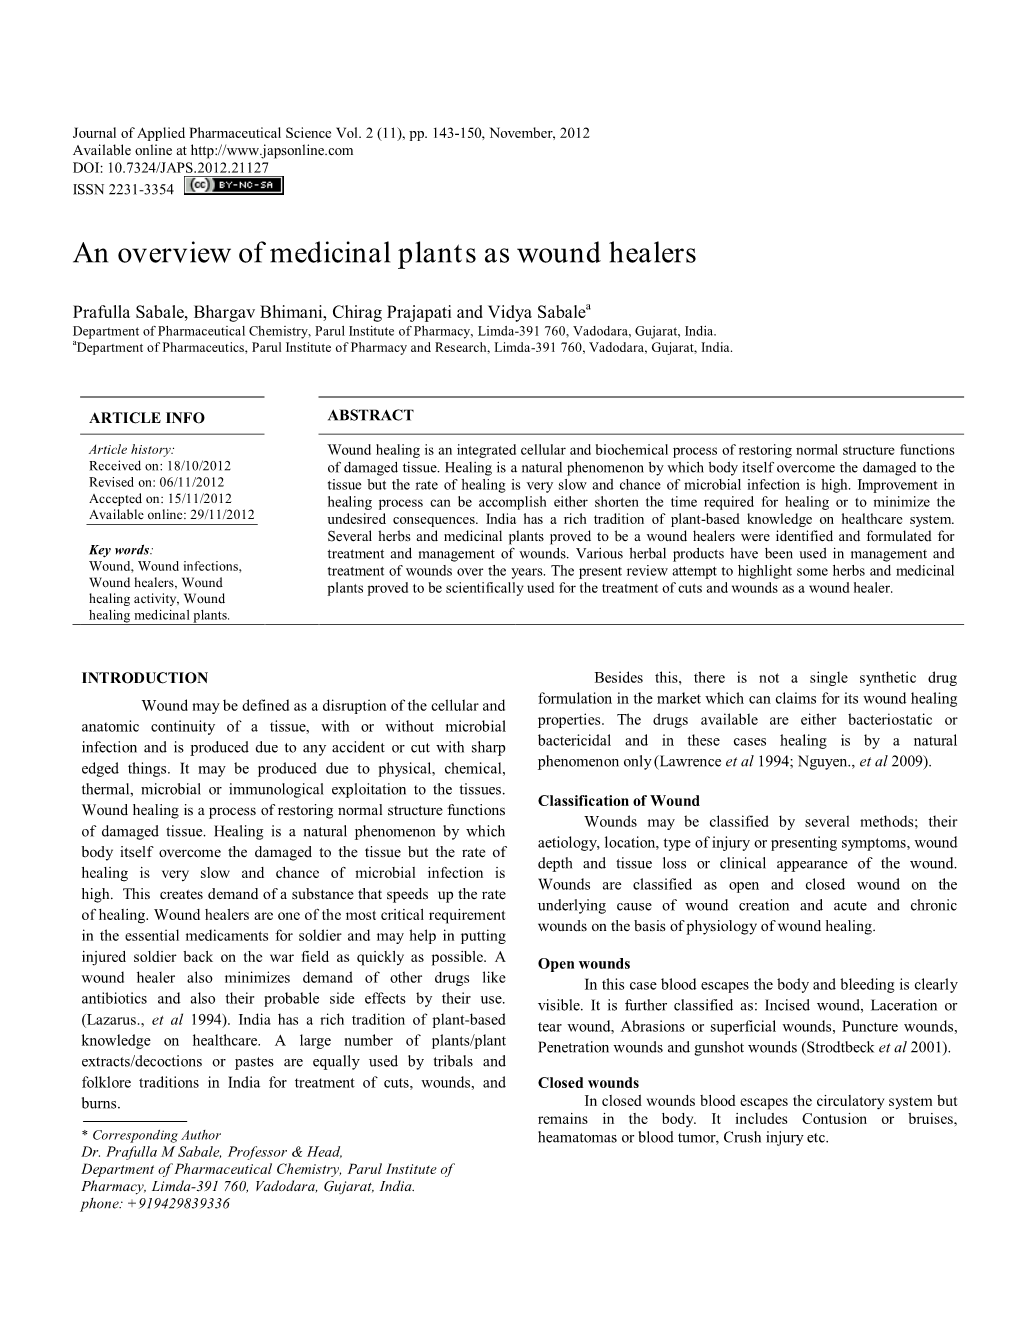 An Overview of Medicinal Plants As Wound Healers